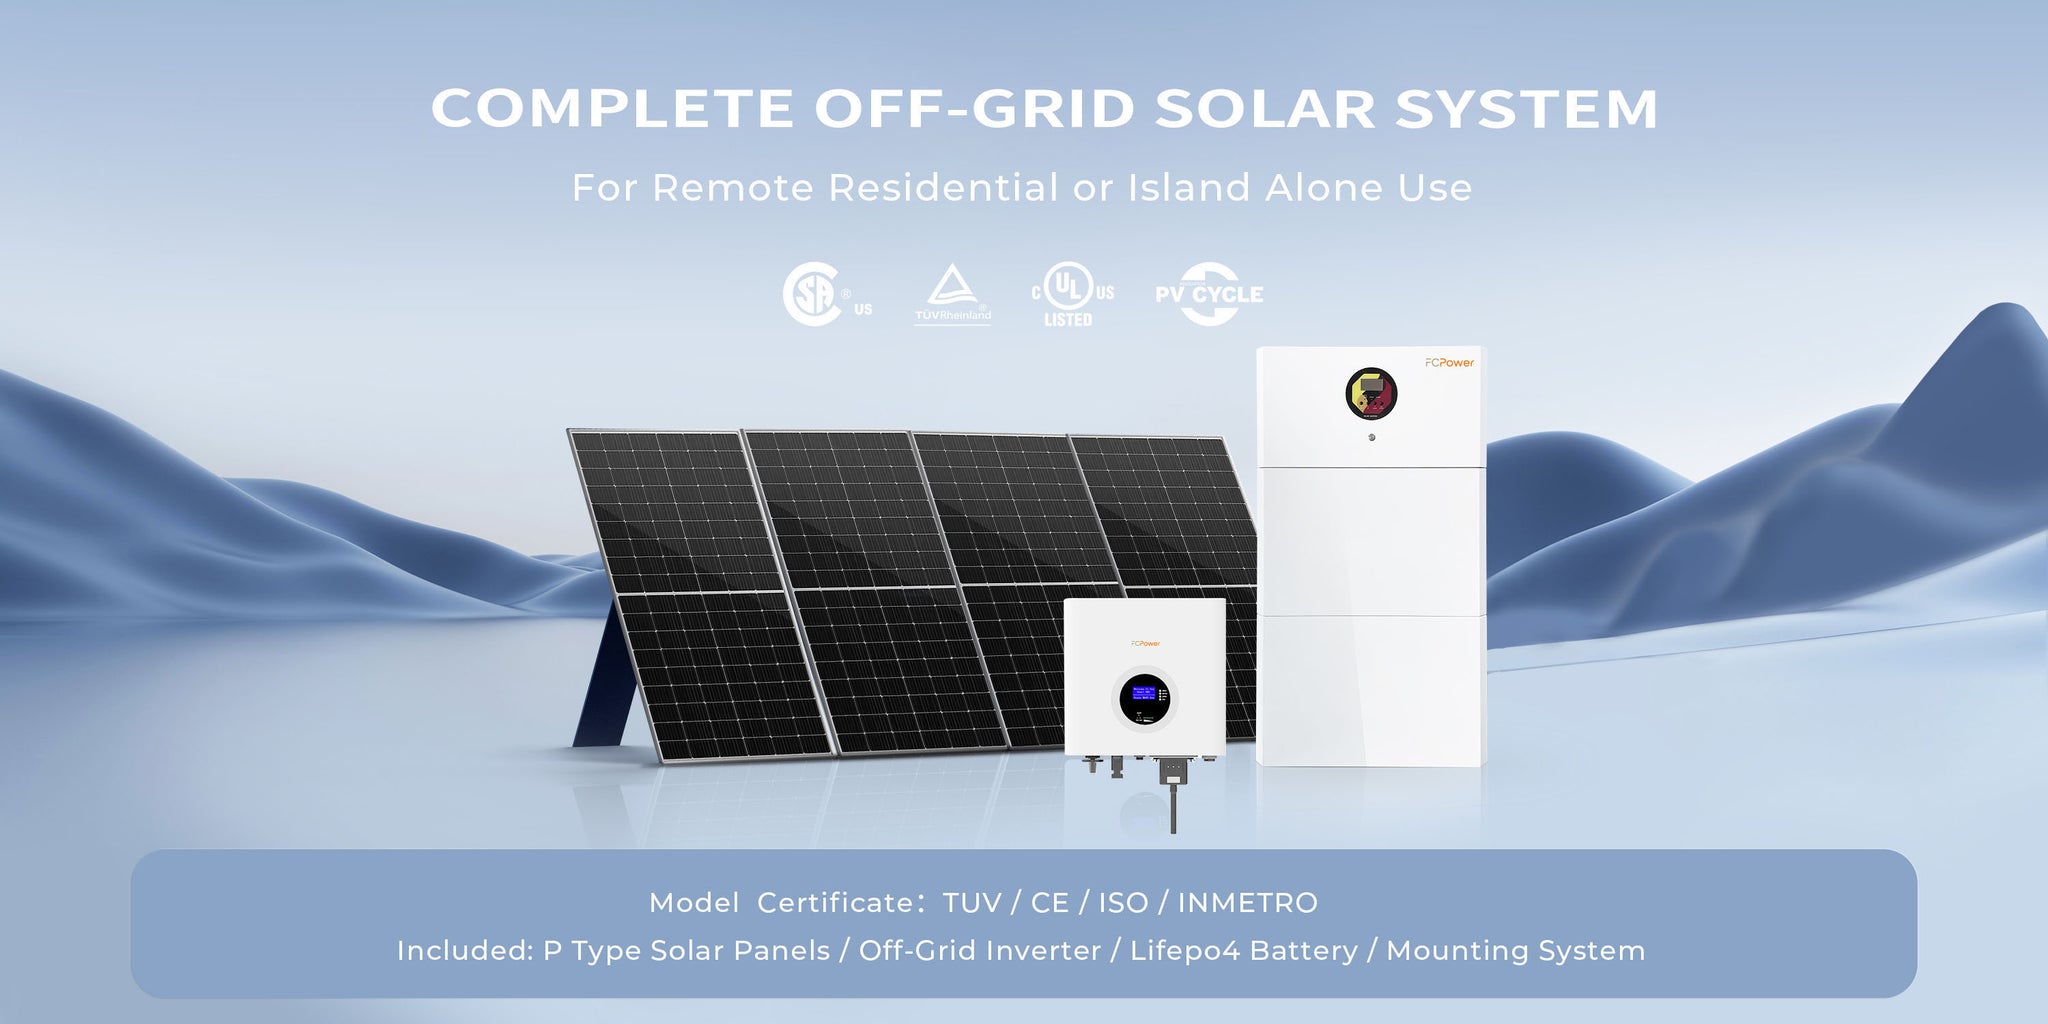 6kW Off-Grid Solar System: All-in-One Solution